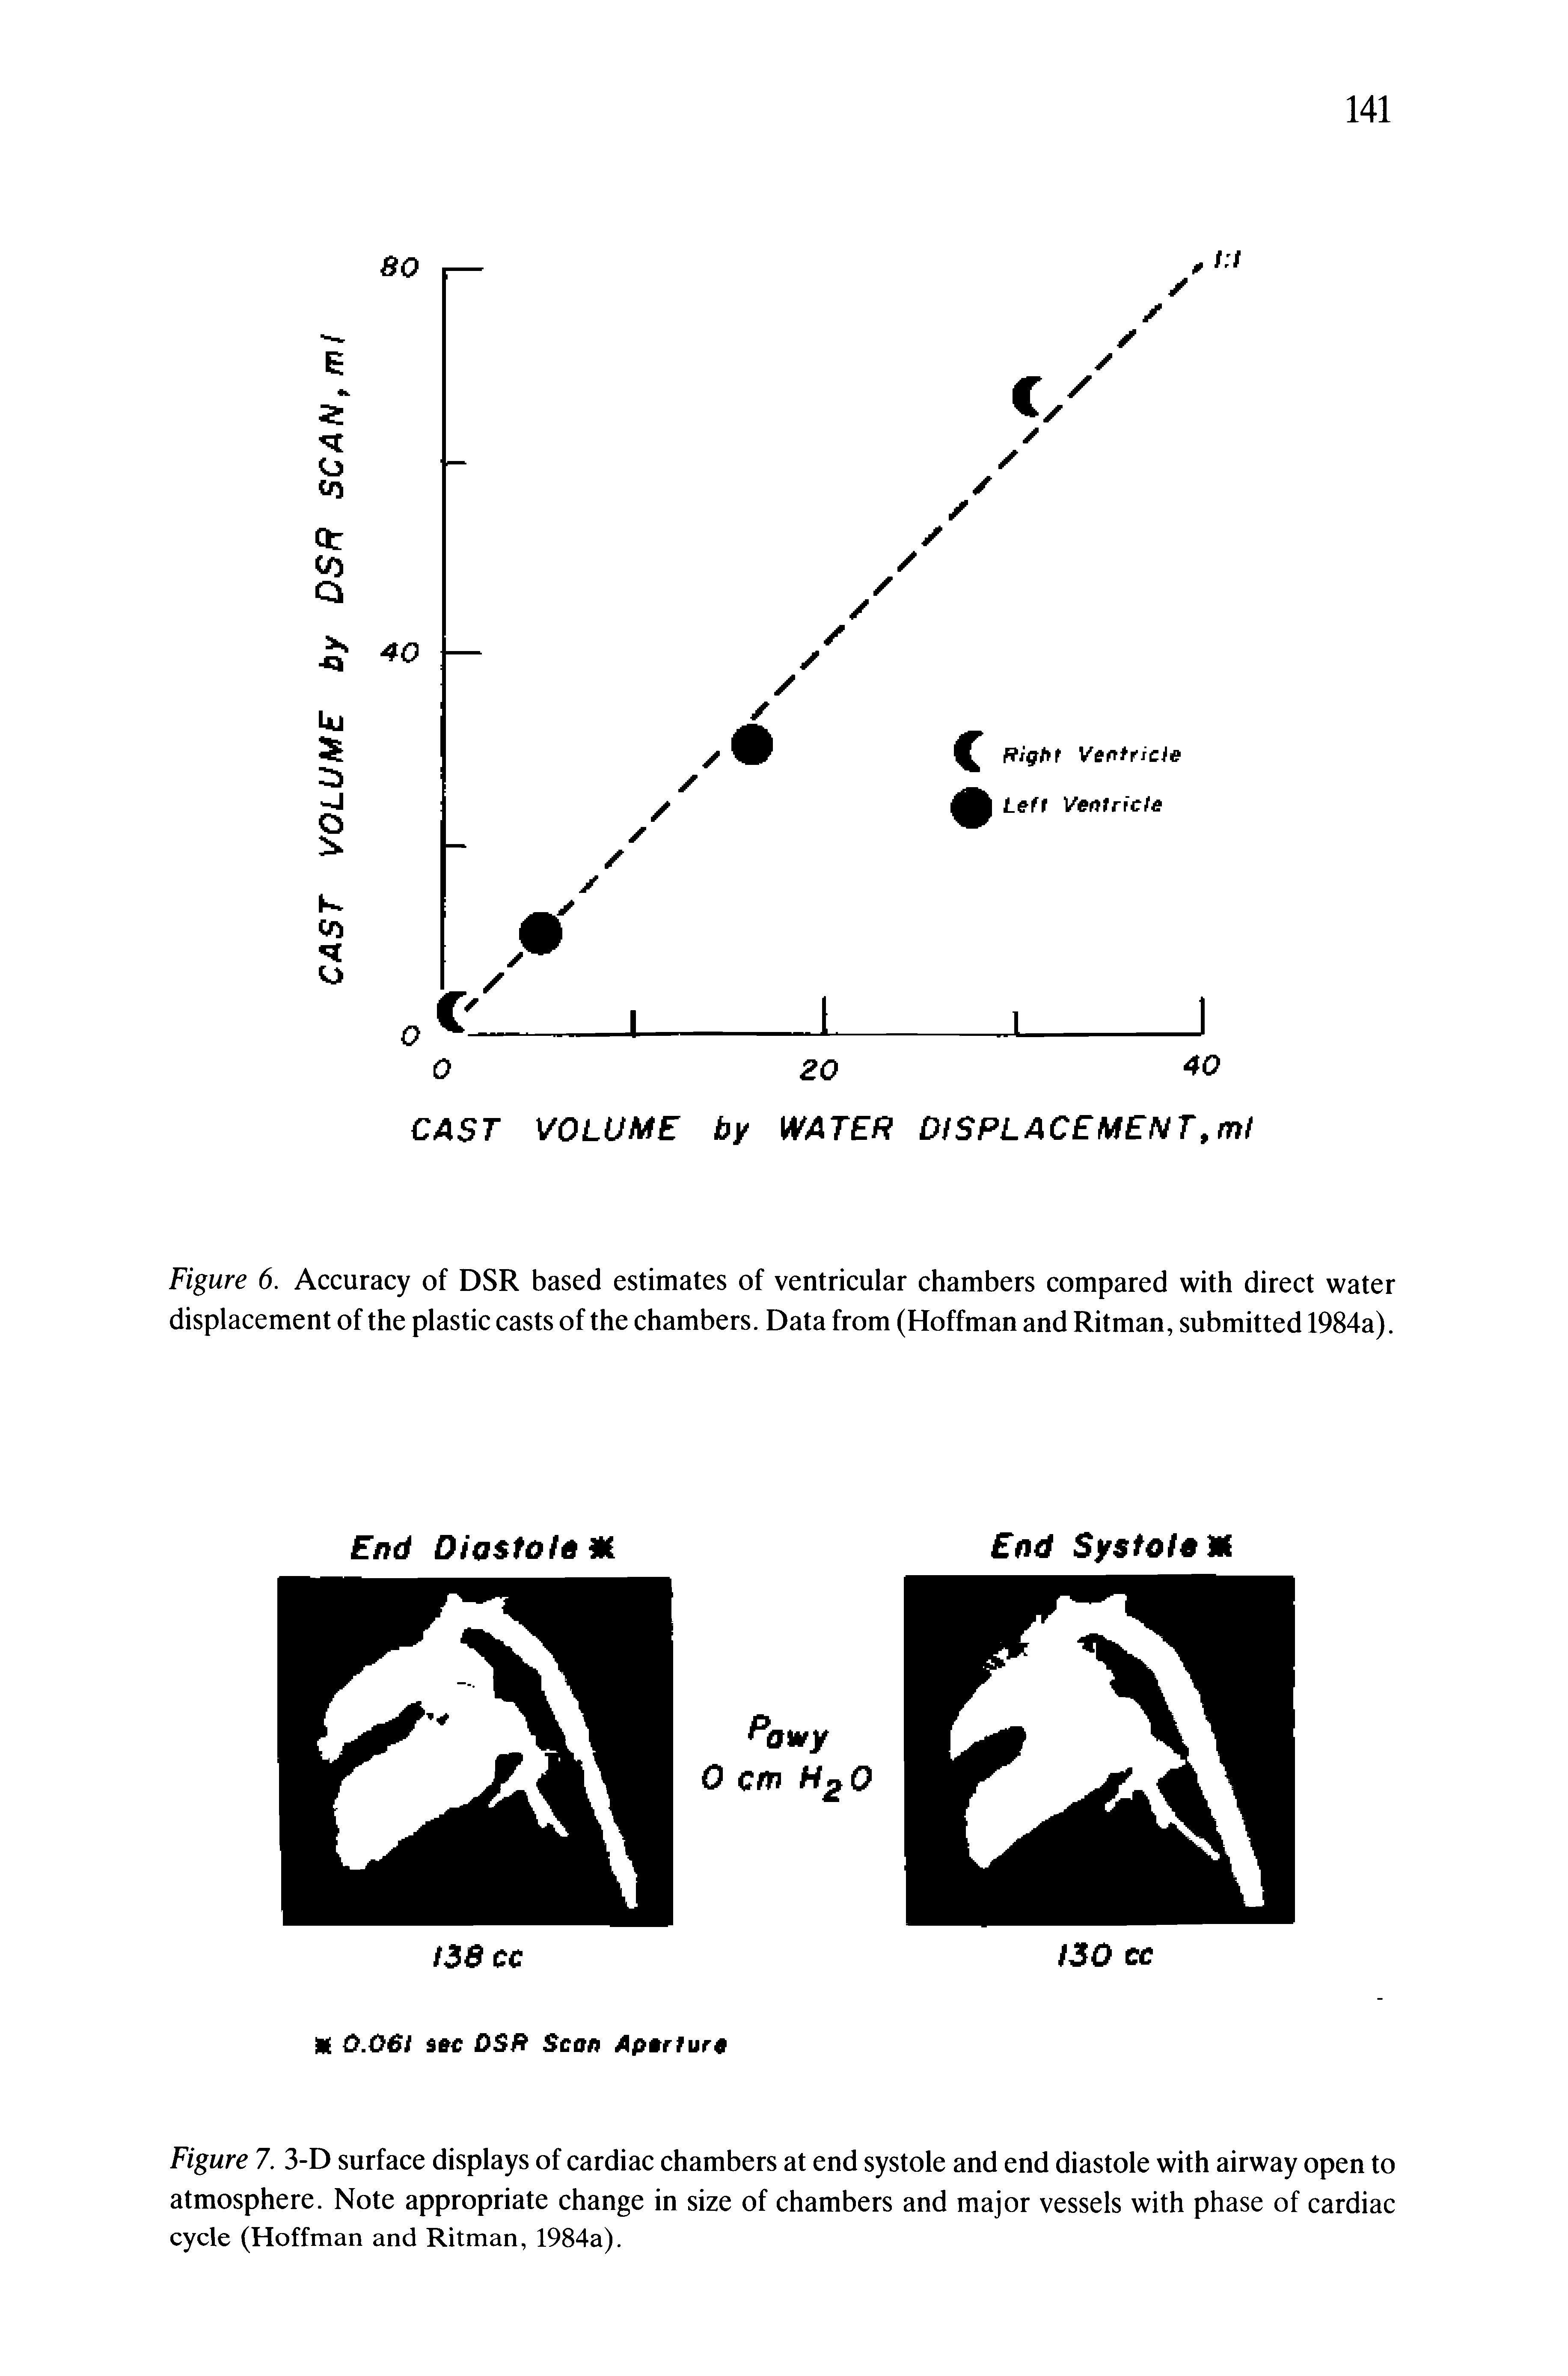 Figure 6. Accuracy of DSR based estimates of ventricular chambers compared with direct water displacement of the plastic casts of the chambers. Data from (Hoffman and Ritman, submitted 1984a).